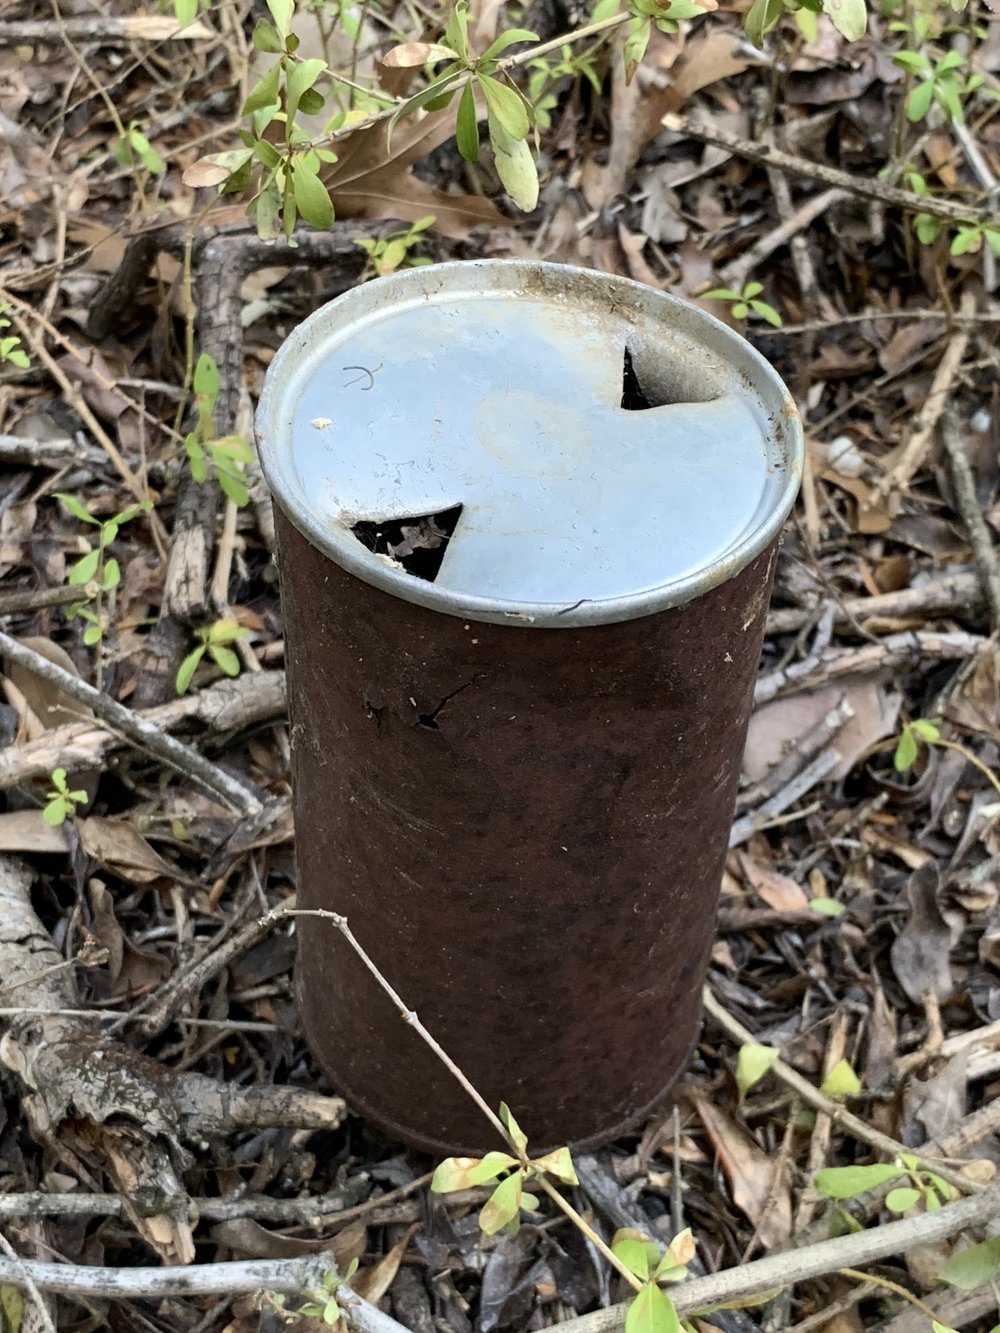  Among the artifacts found when blazing the new trail: Pearl Beer can before pop-tops that required a “church-key” to open. 